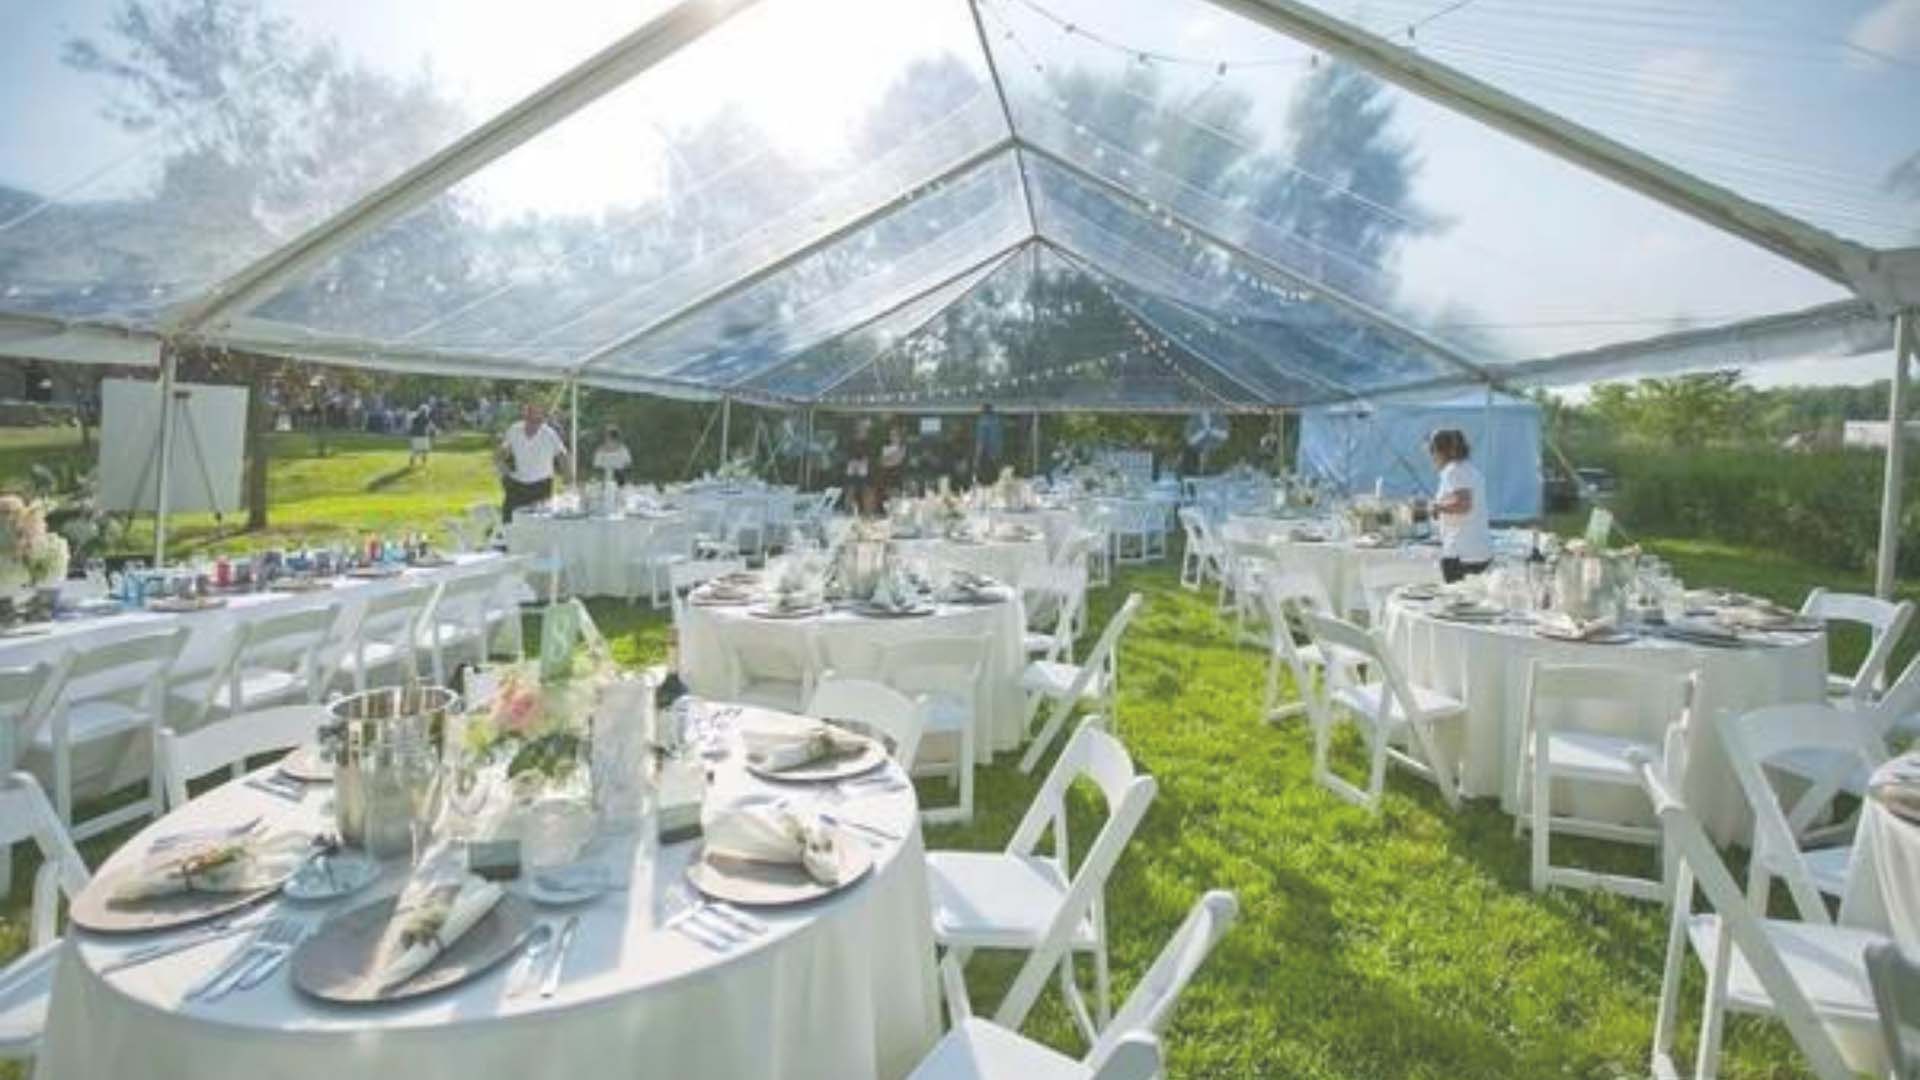 Cornelius table and chair rentals